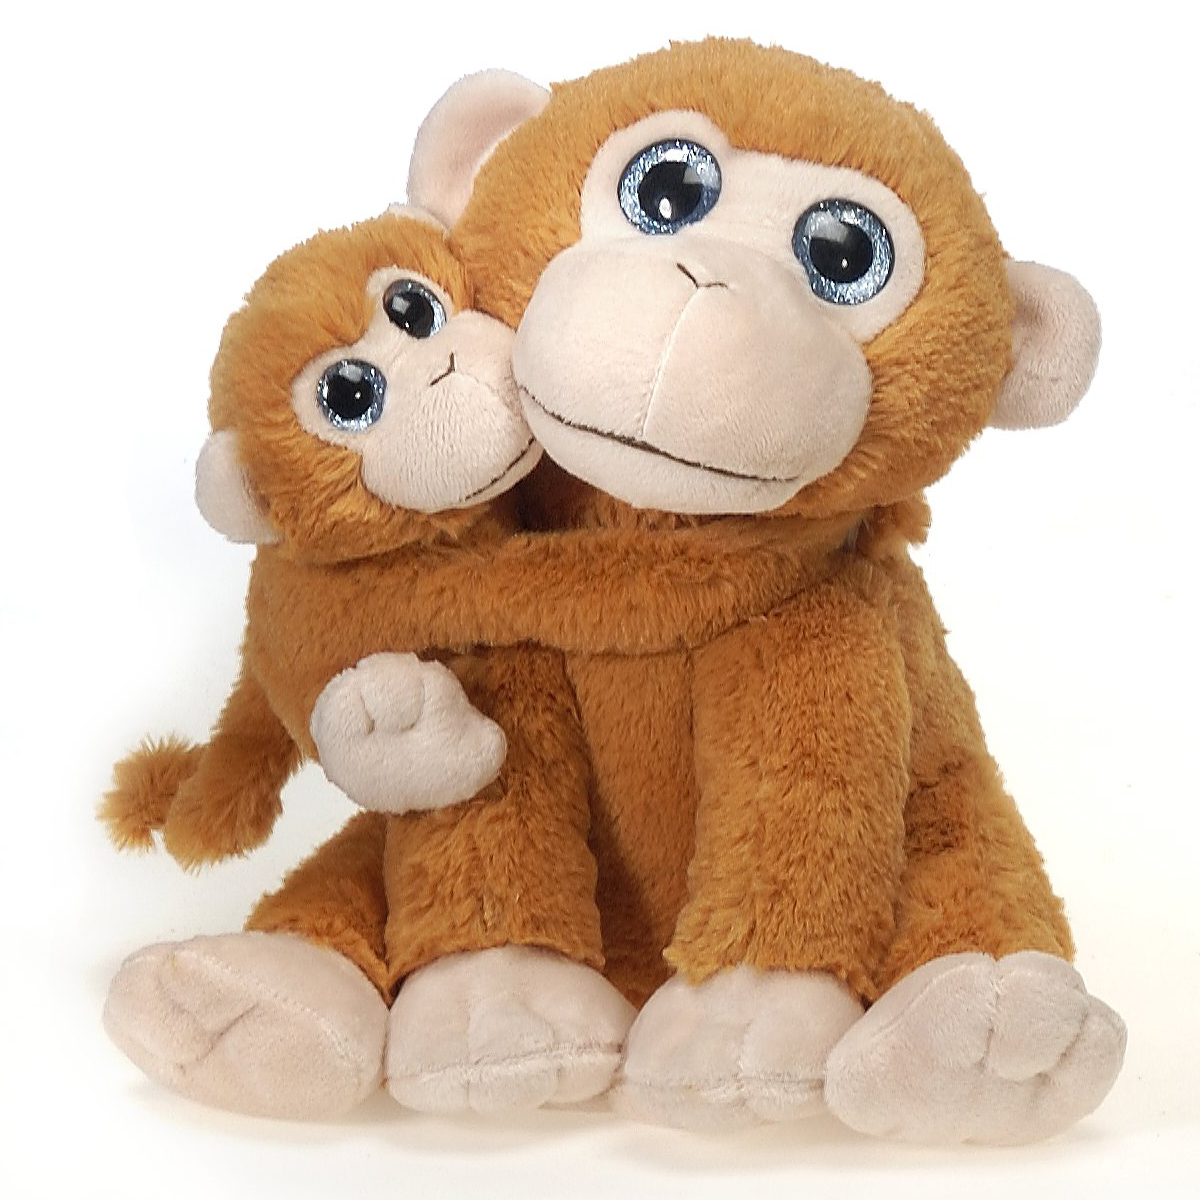 mommy and baby stuffed animals